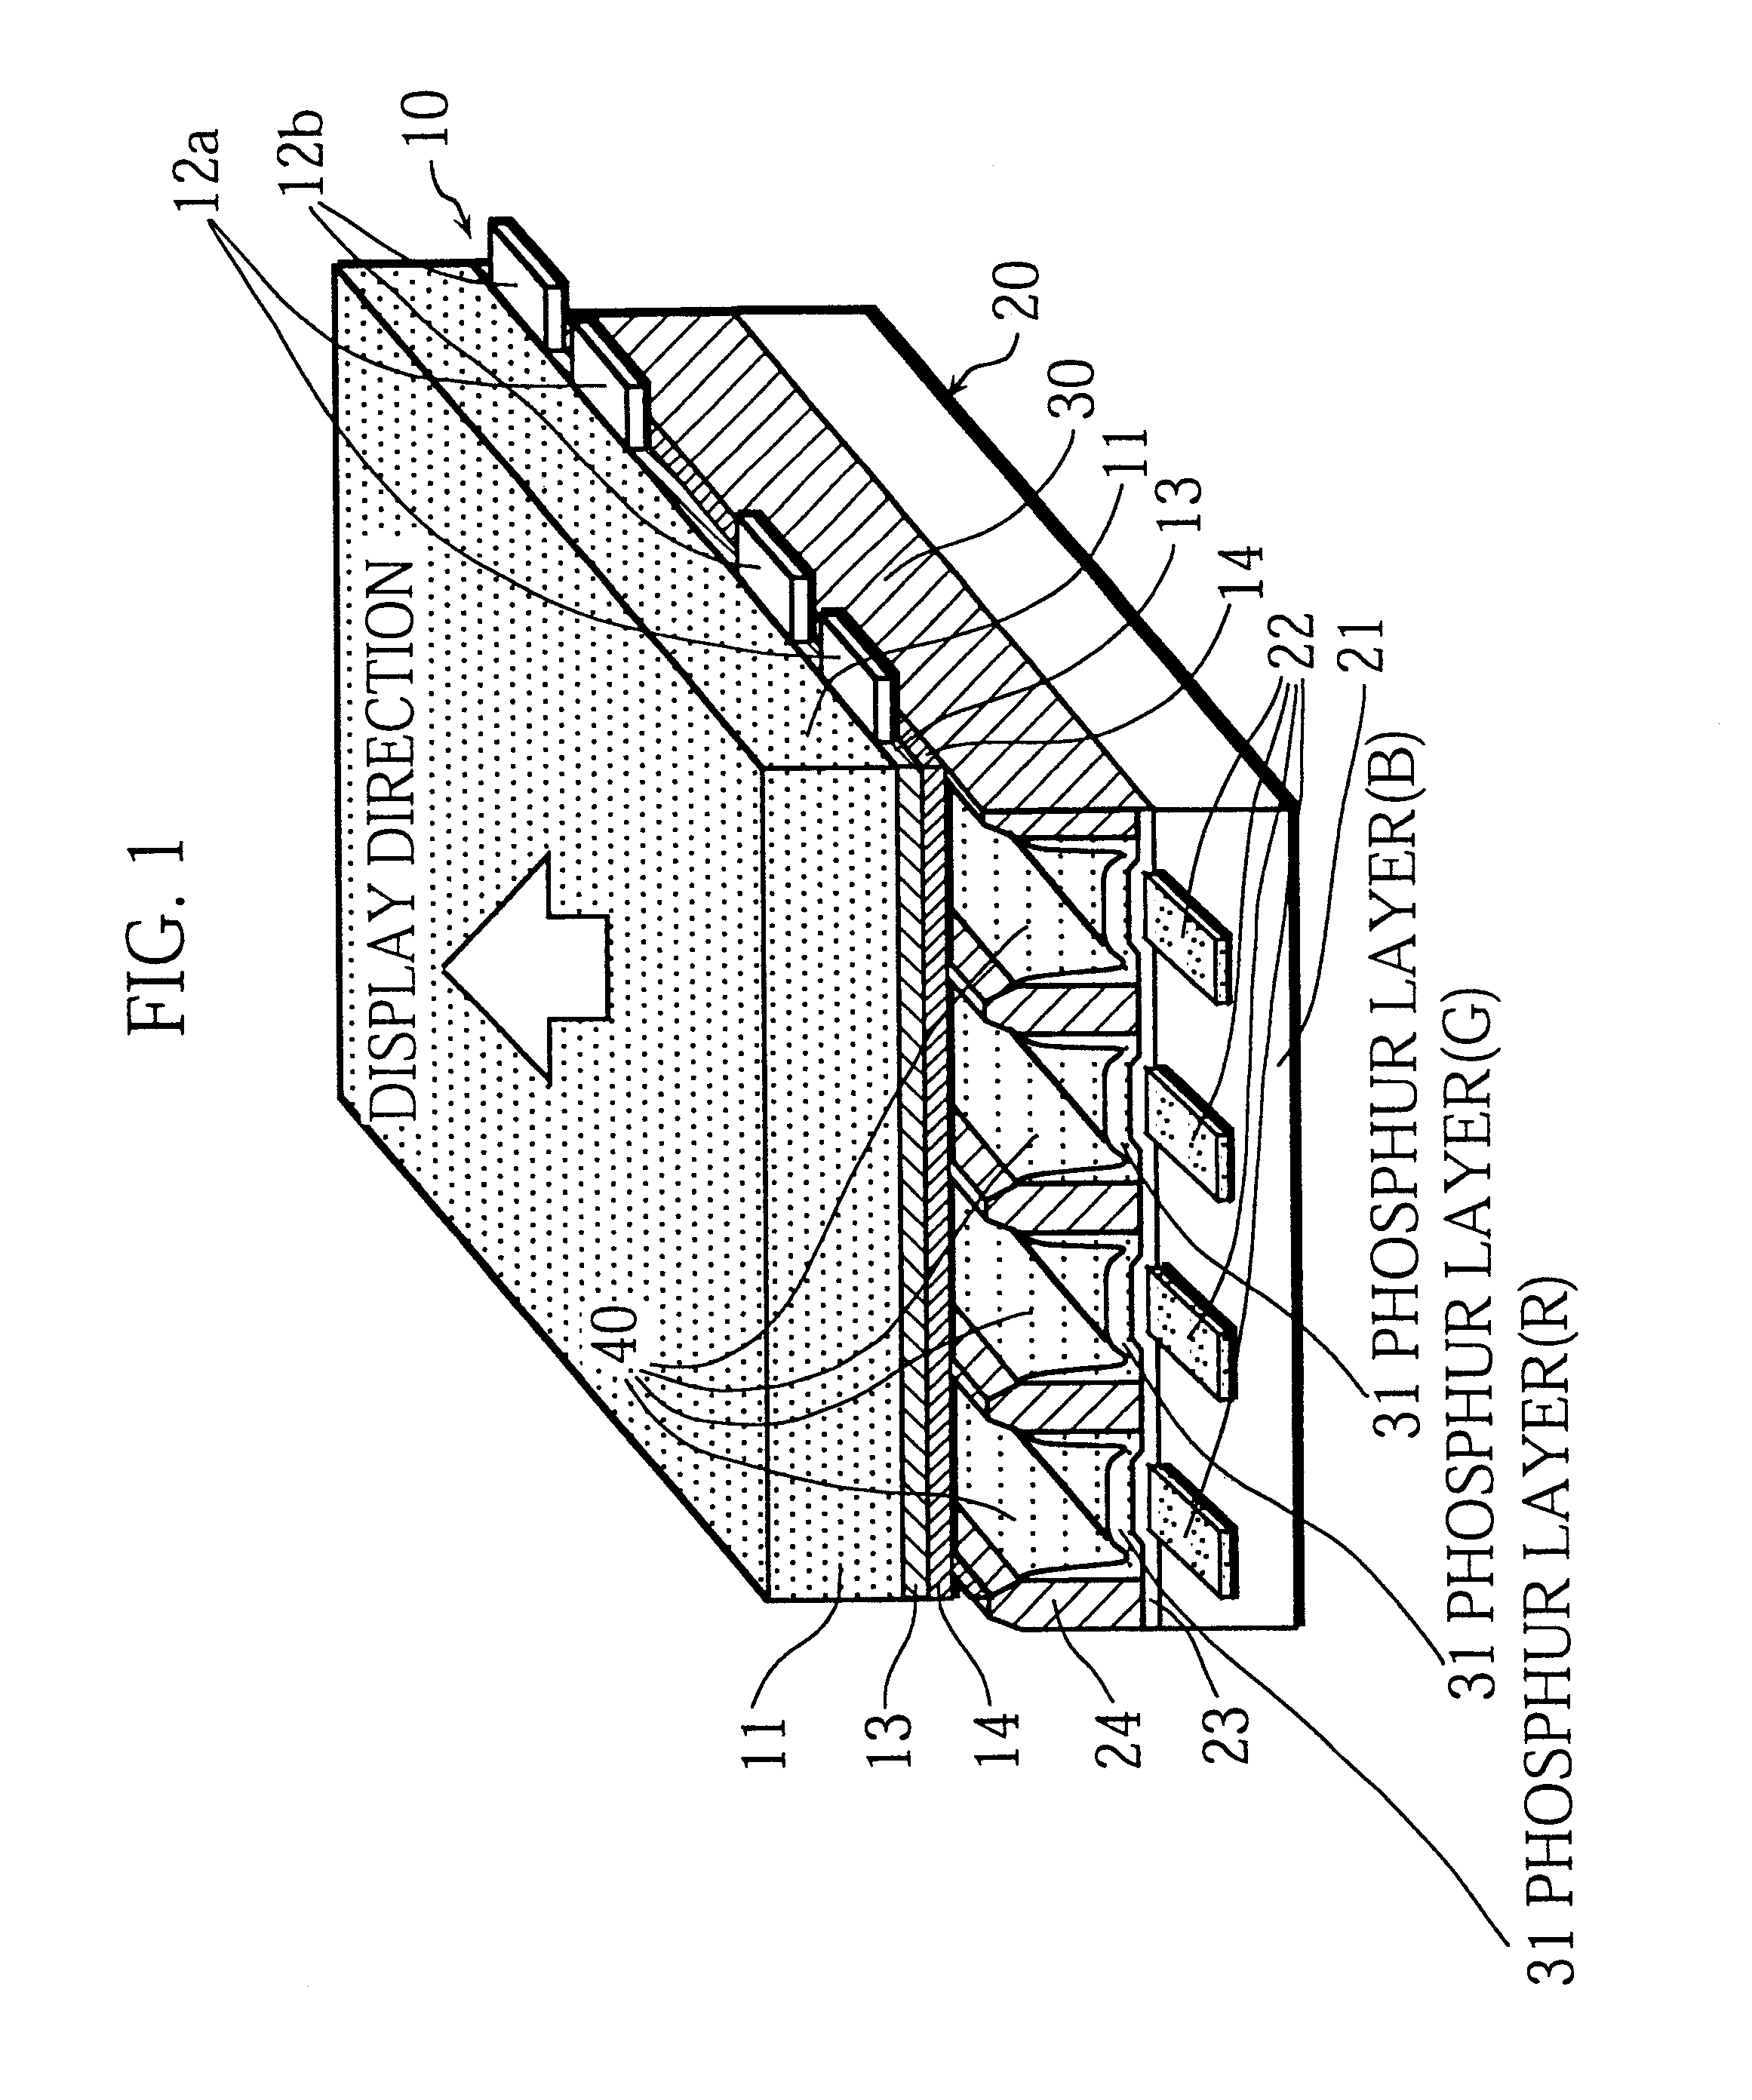 Plasma display panel manufacturing method for manufacturing a plasma display panel with superior picture quality, a manufacturing apparatus and a phosphor ink